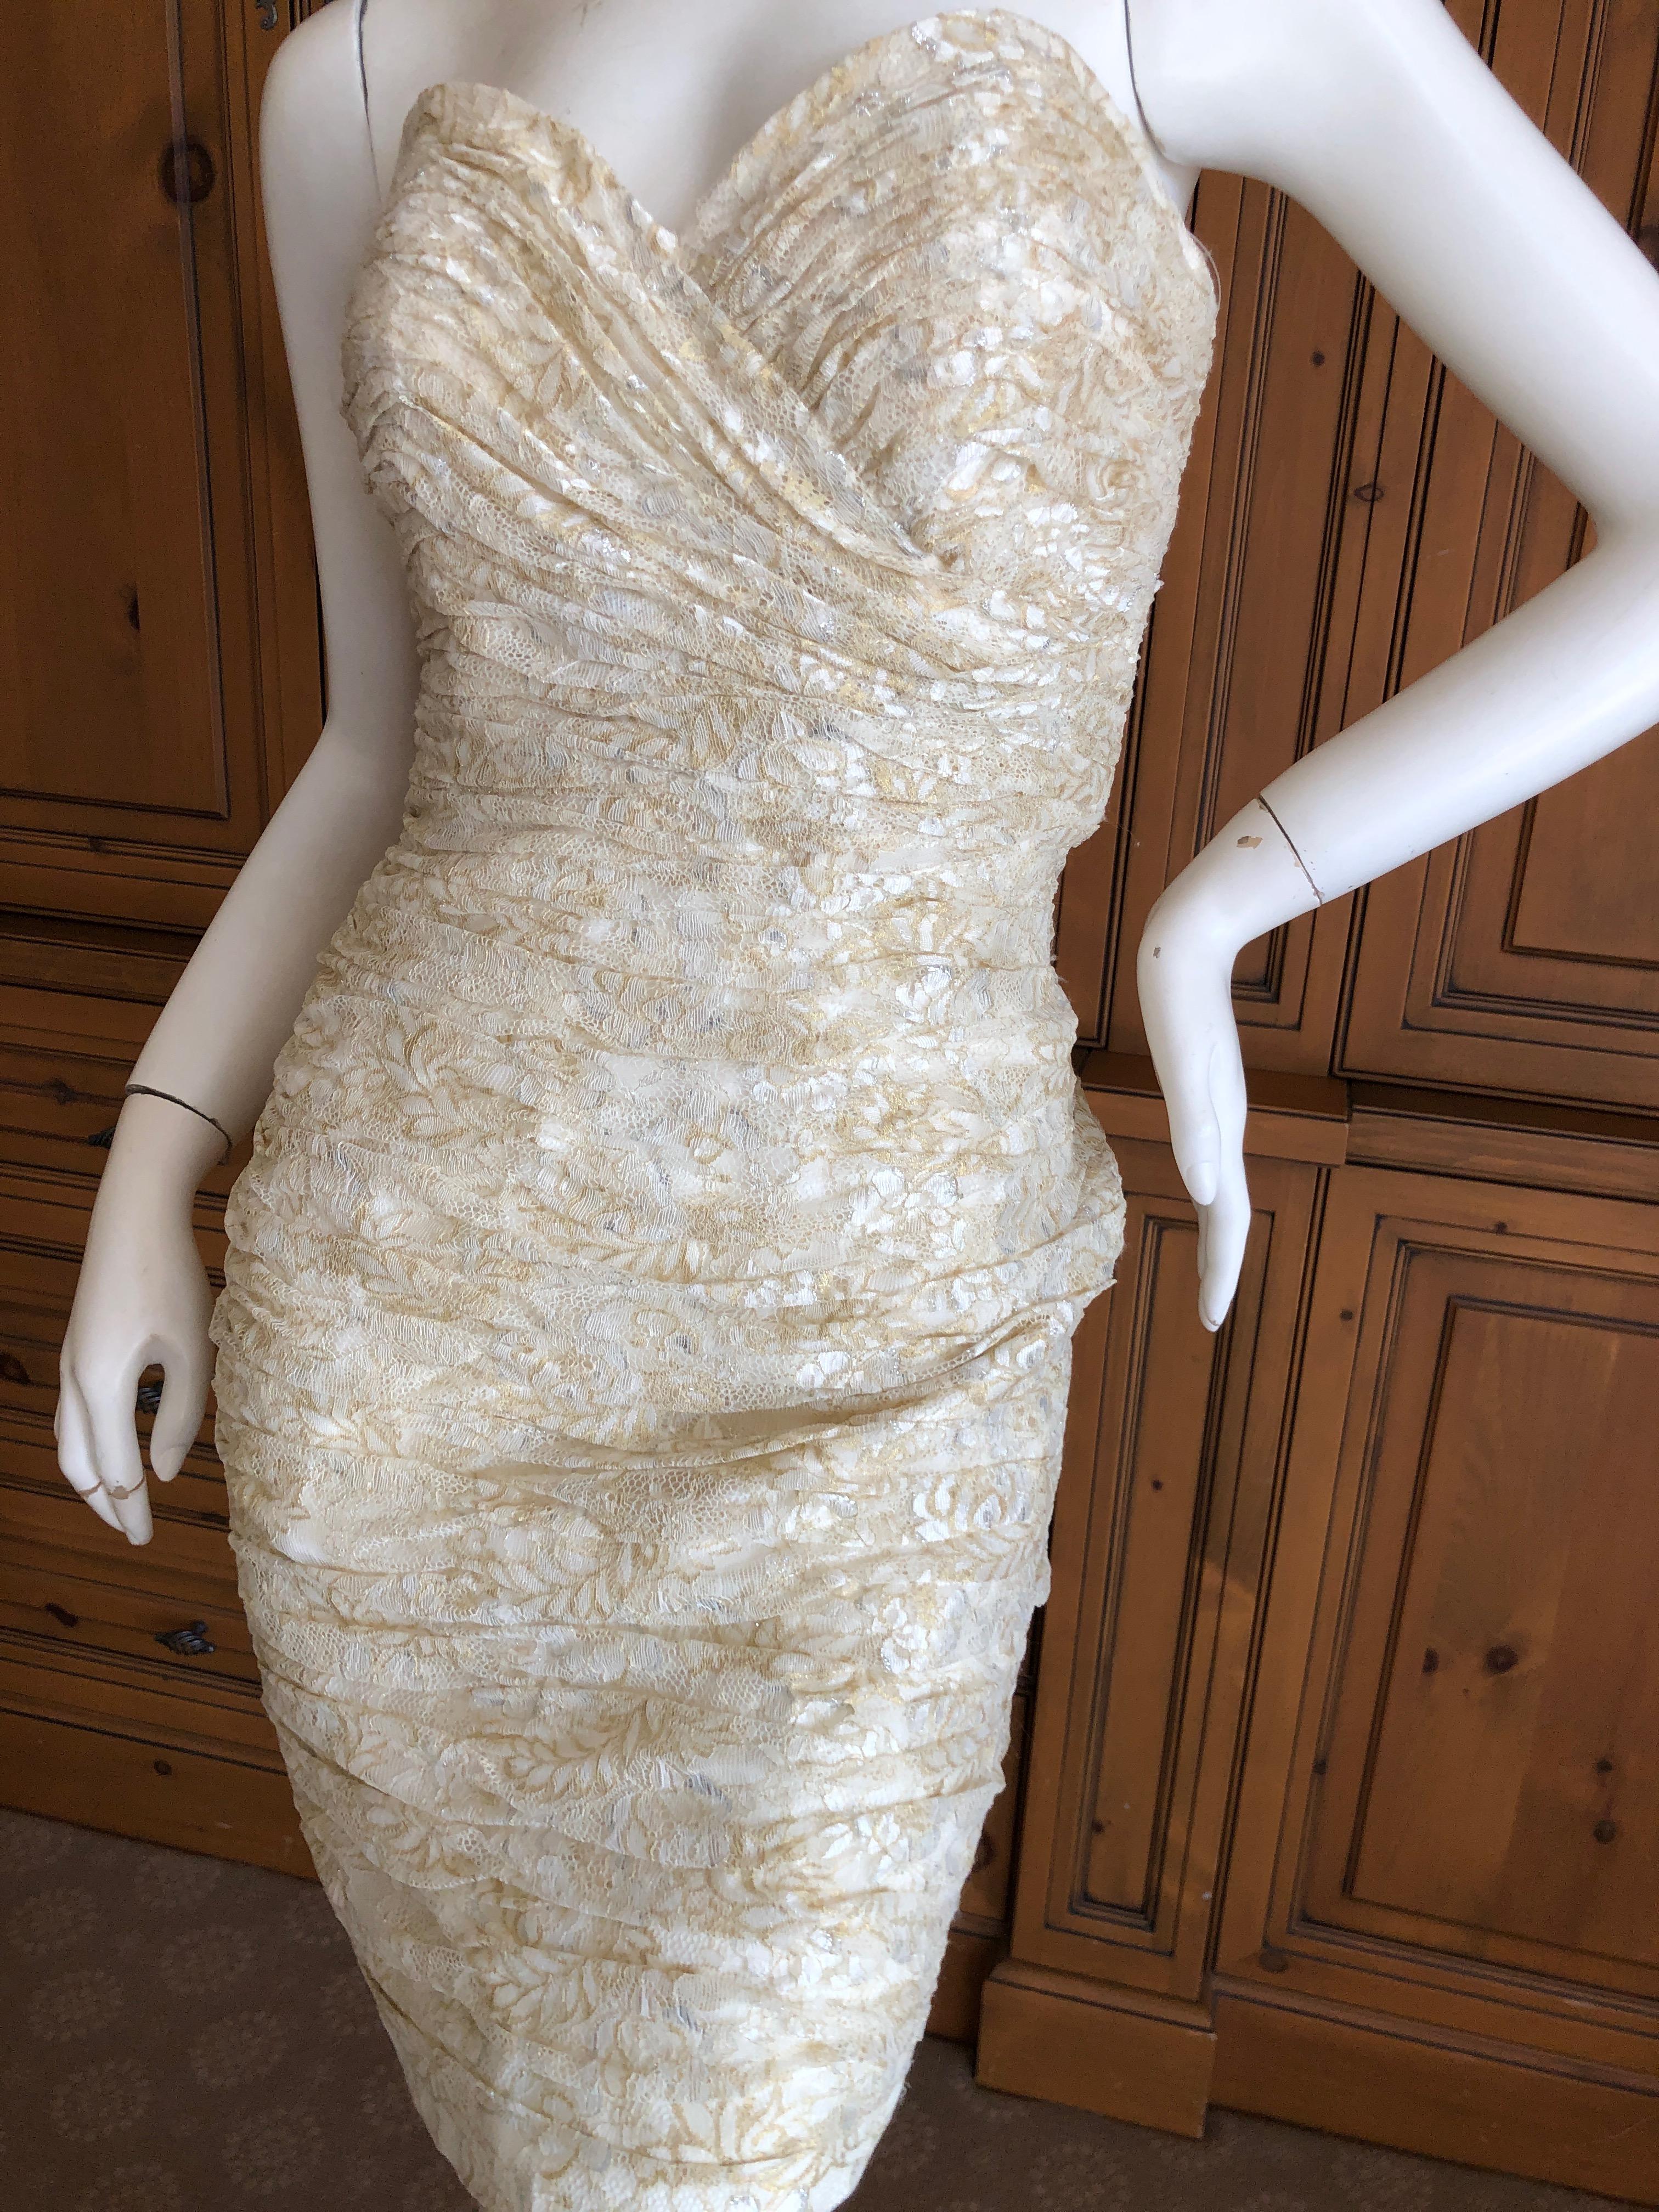 Vicky Tiel Vintage 80's Gold and Ivory Lace Strapless Cocktail Dress
The witty quote was 